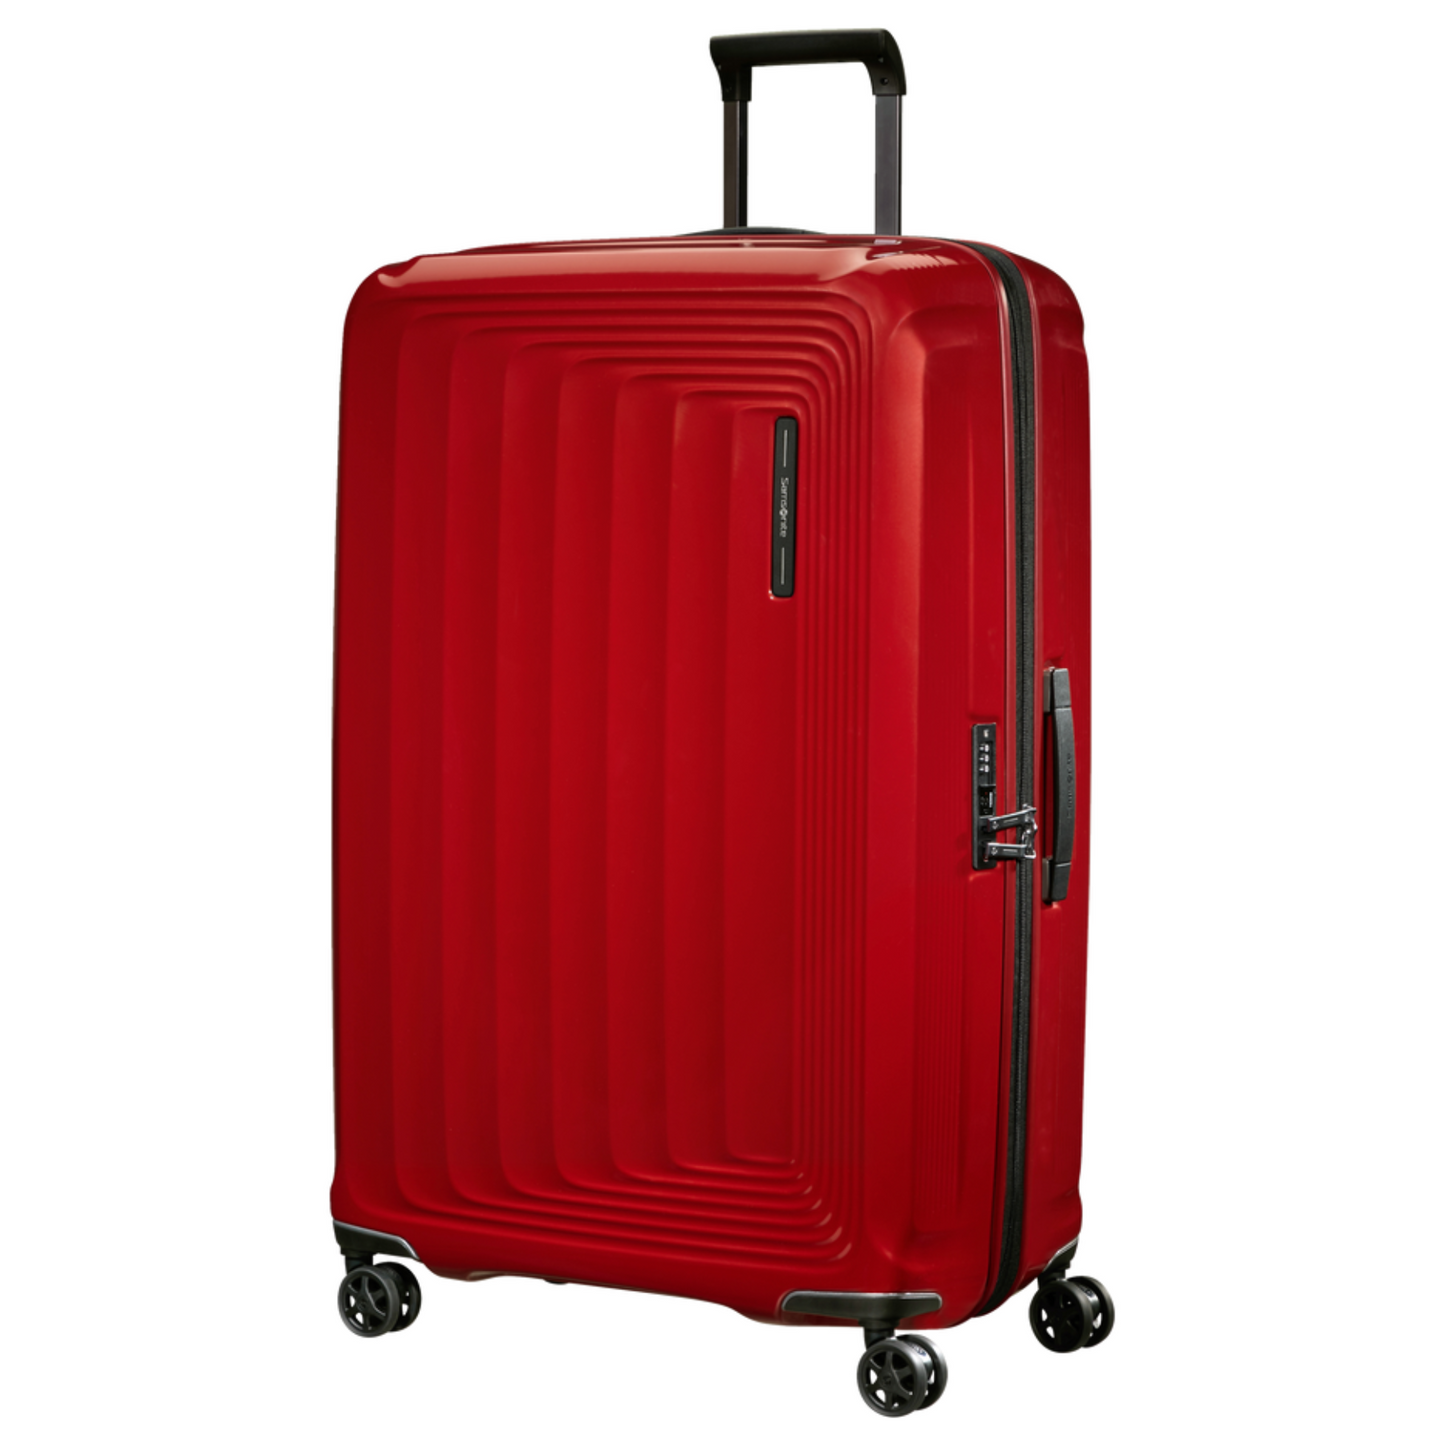 Valise Nuon 4 roues 81cm - Extensible